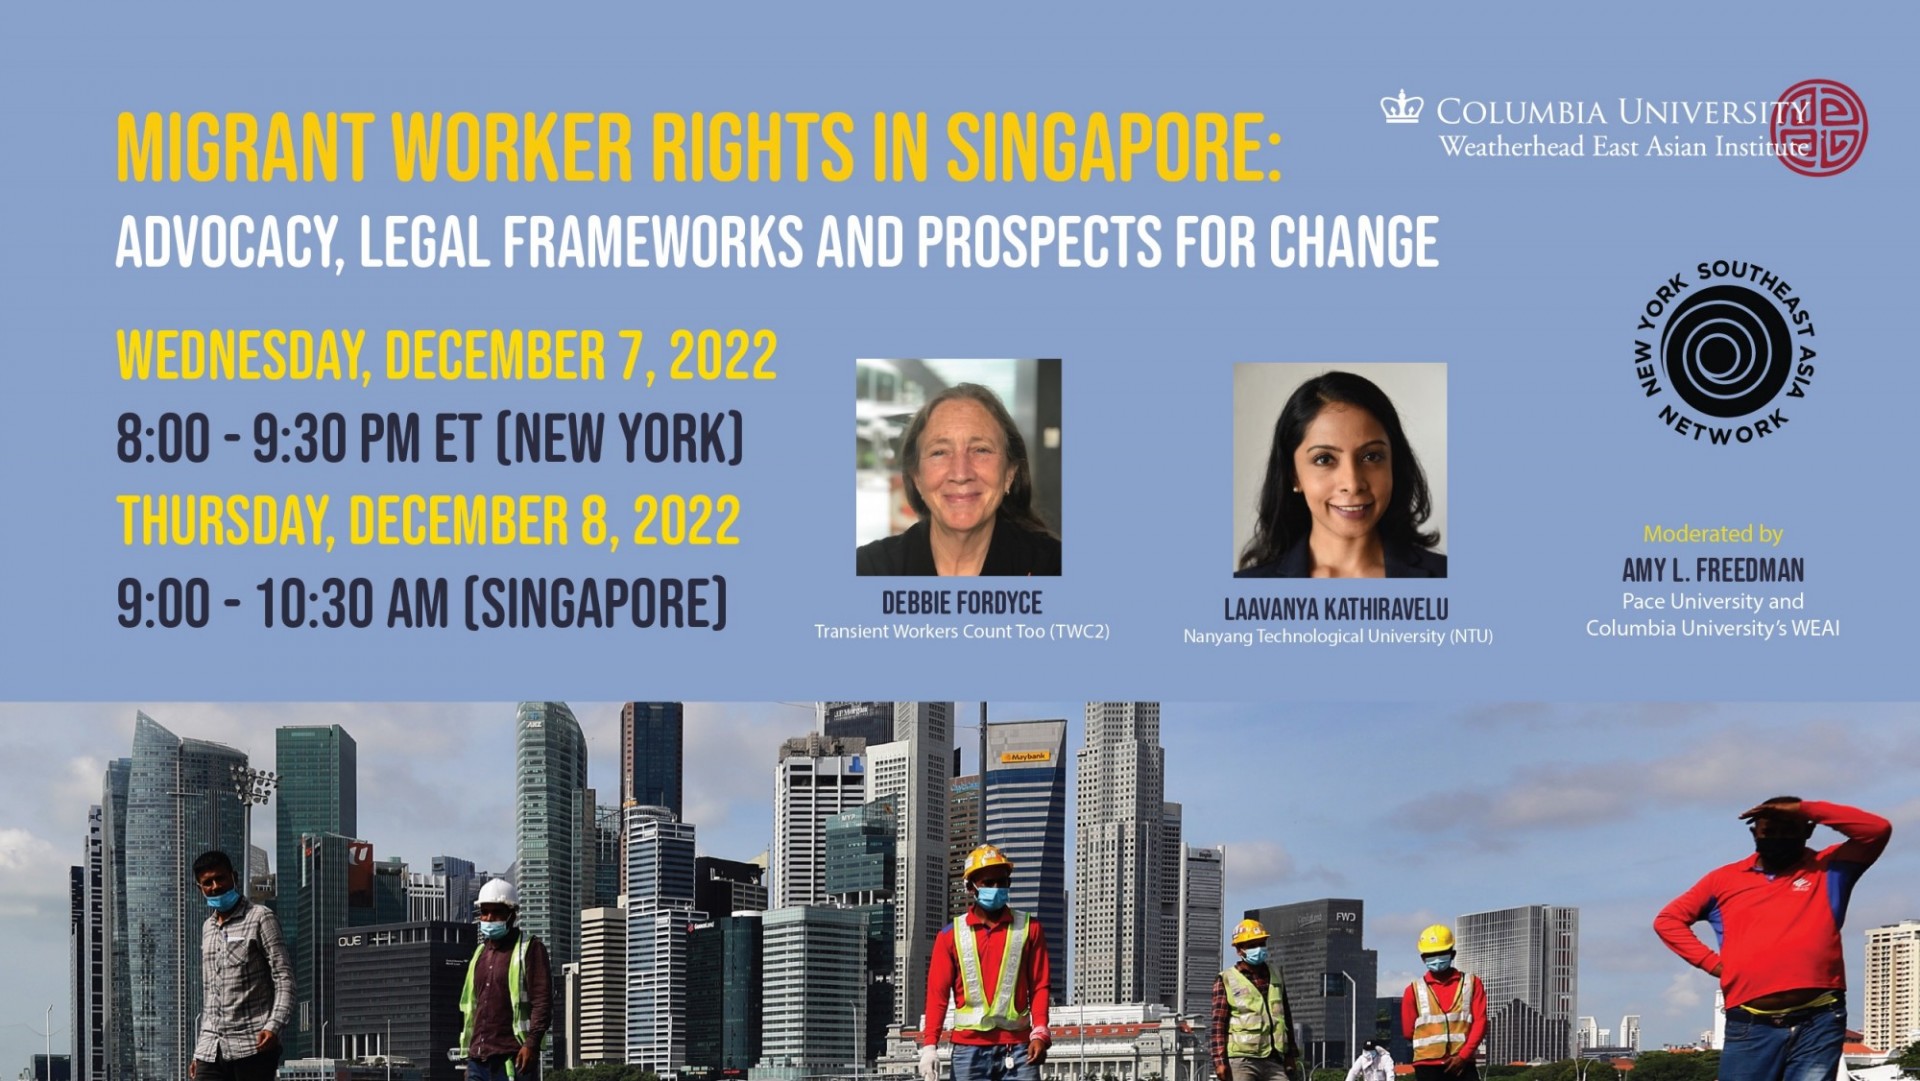 Migrant worker rights in Singapore